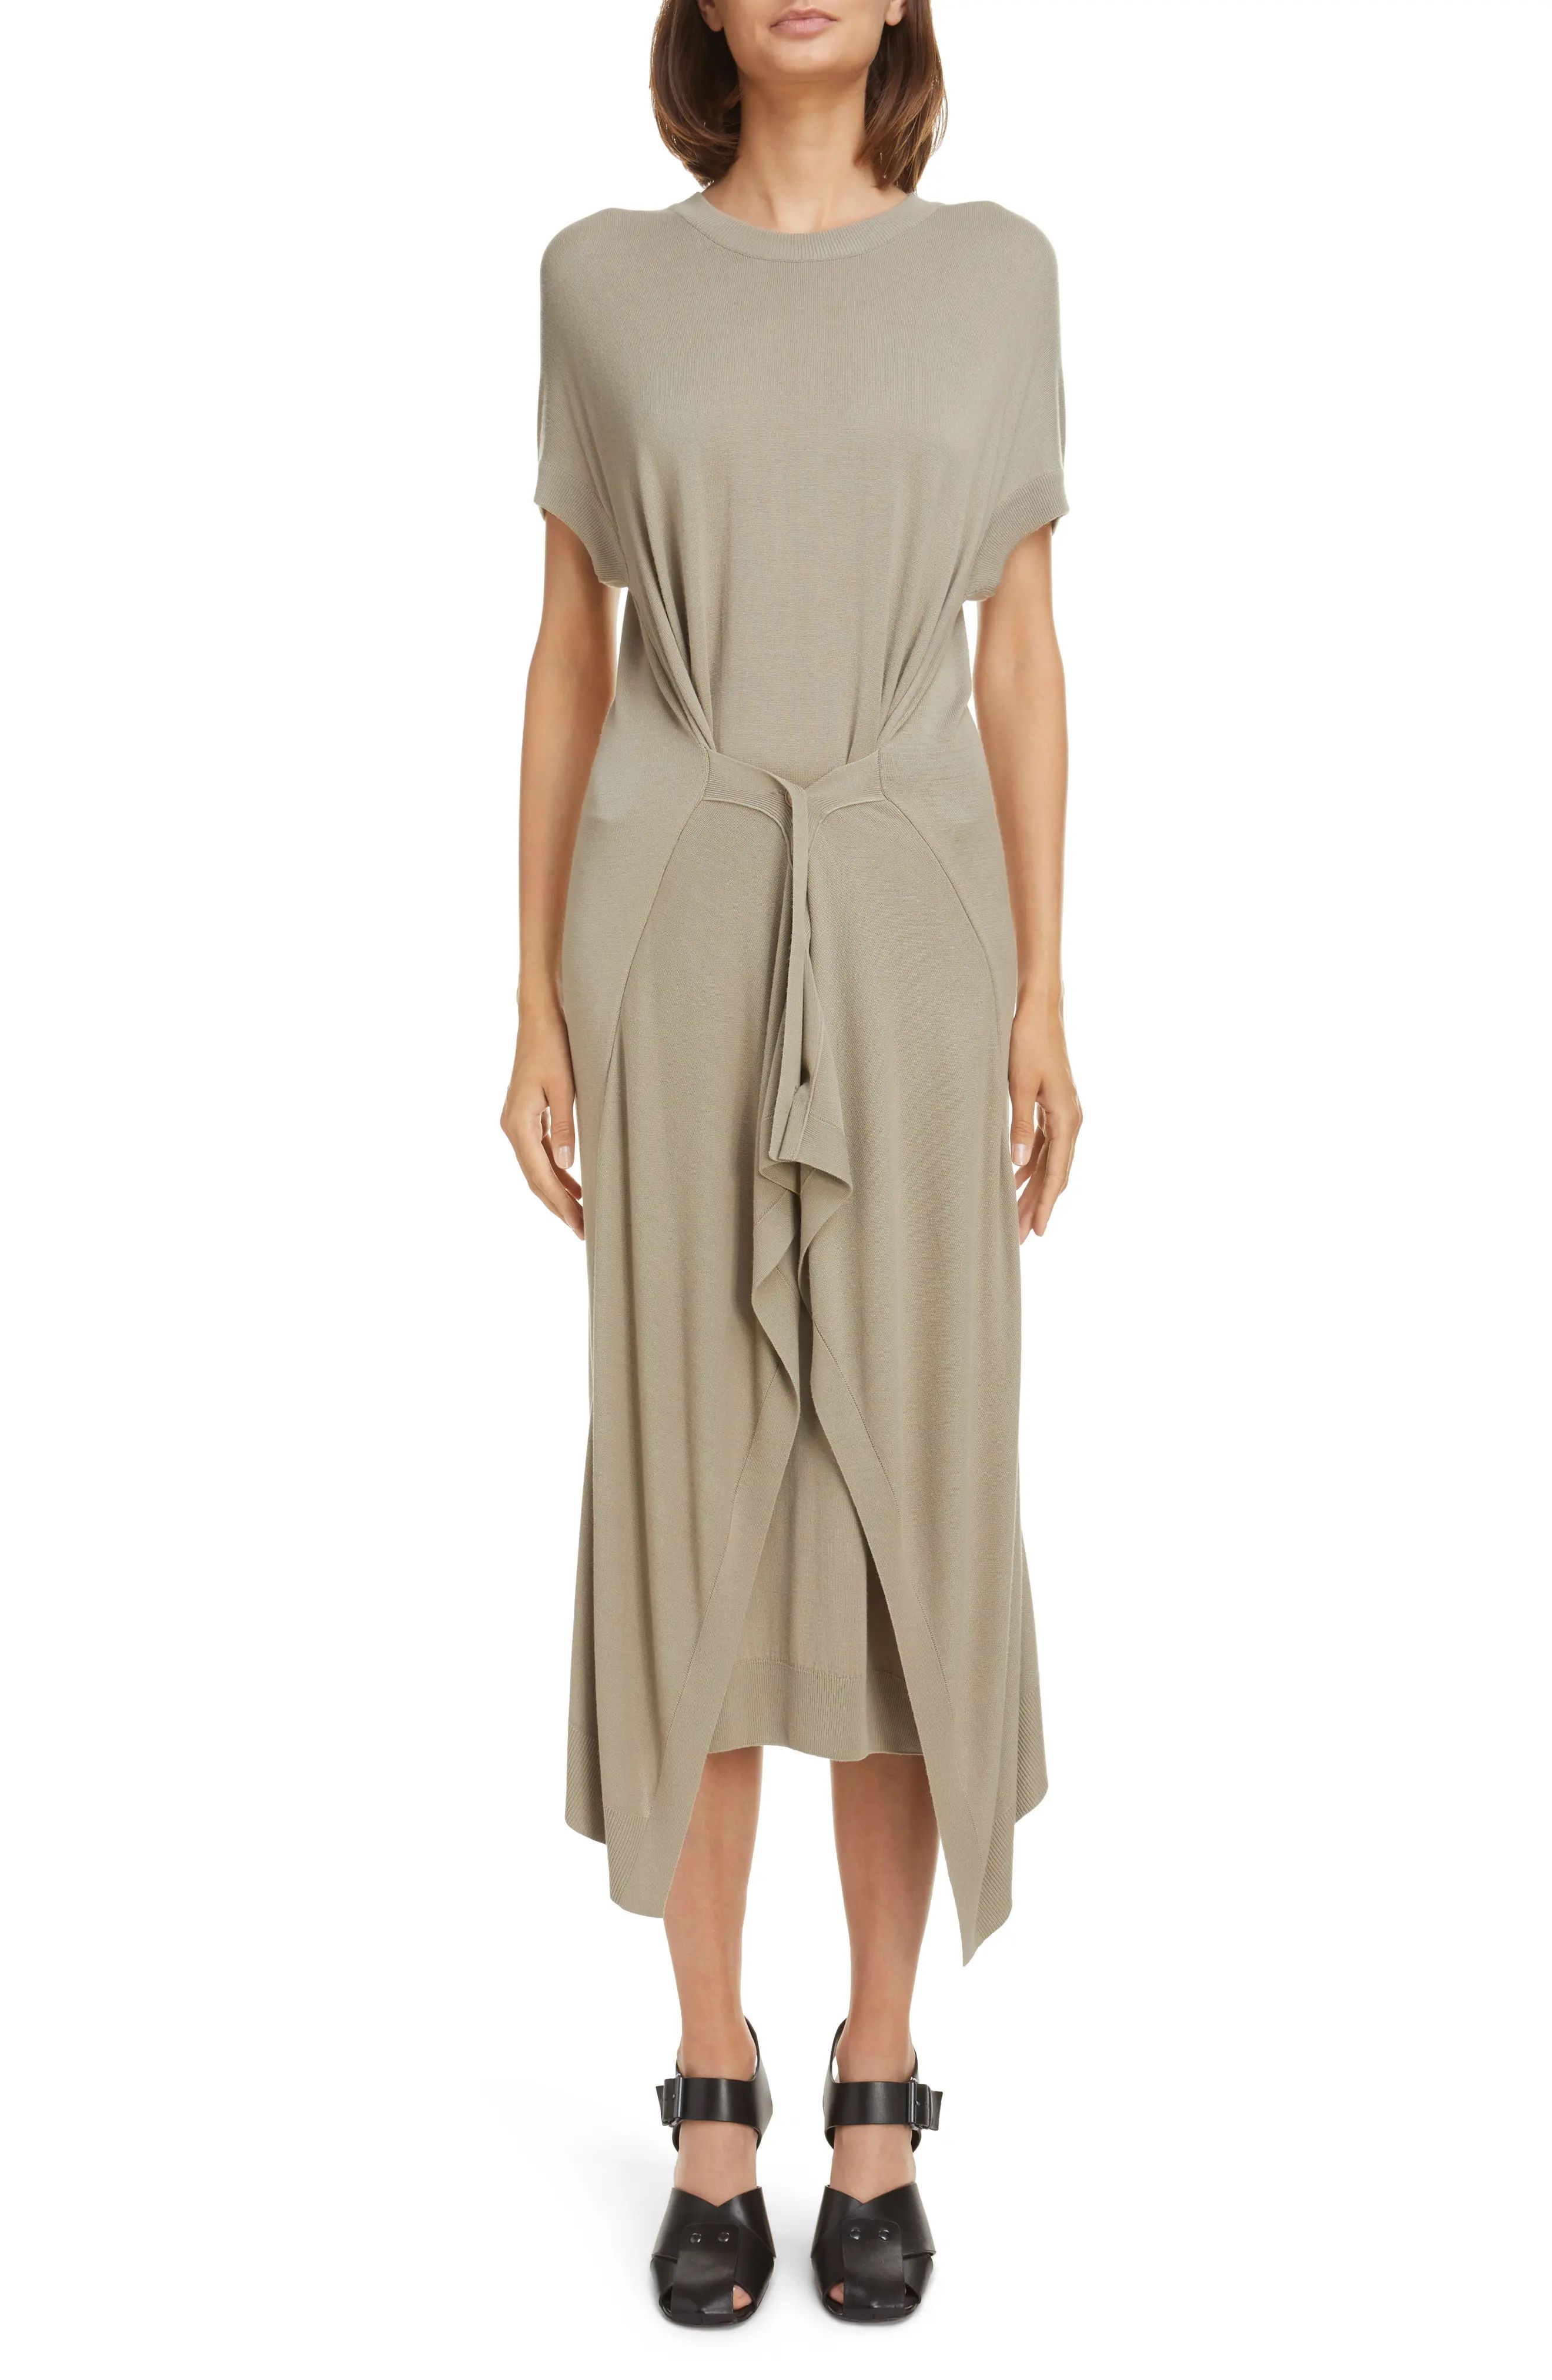 Lemaire Double Layer Midi Sweater Dress in Light Taupe 446 at Nordstrom, Size Medium | Nordstrom